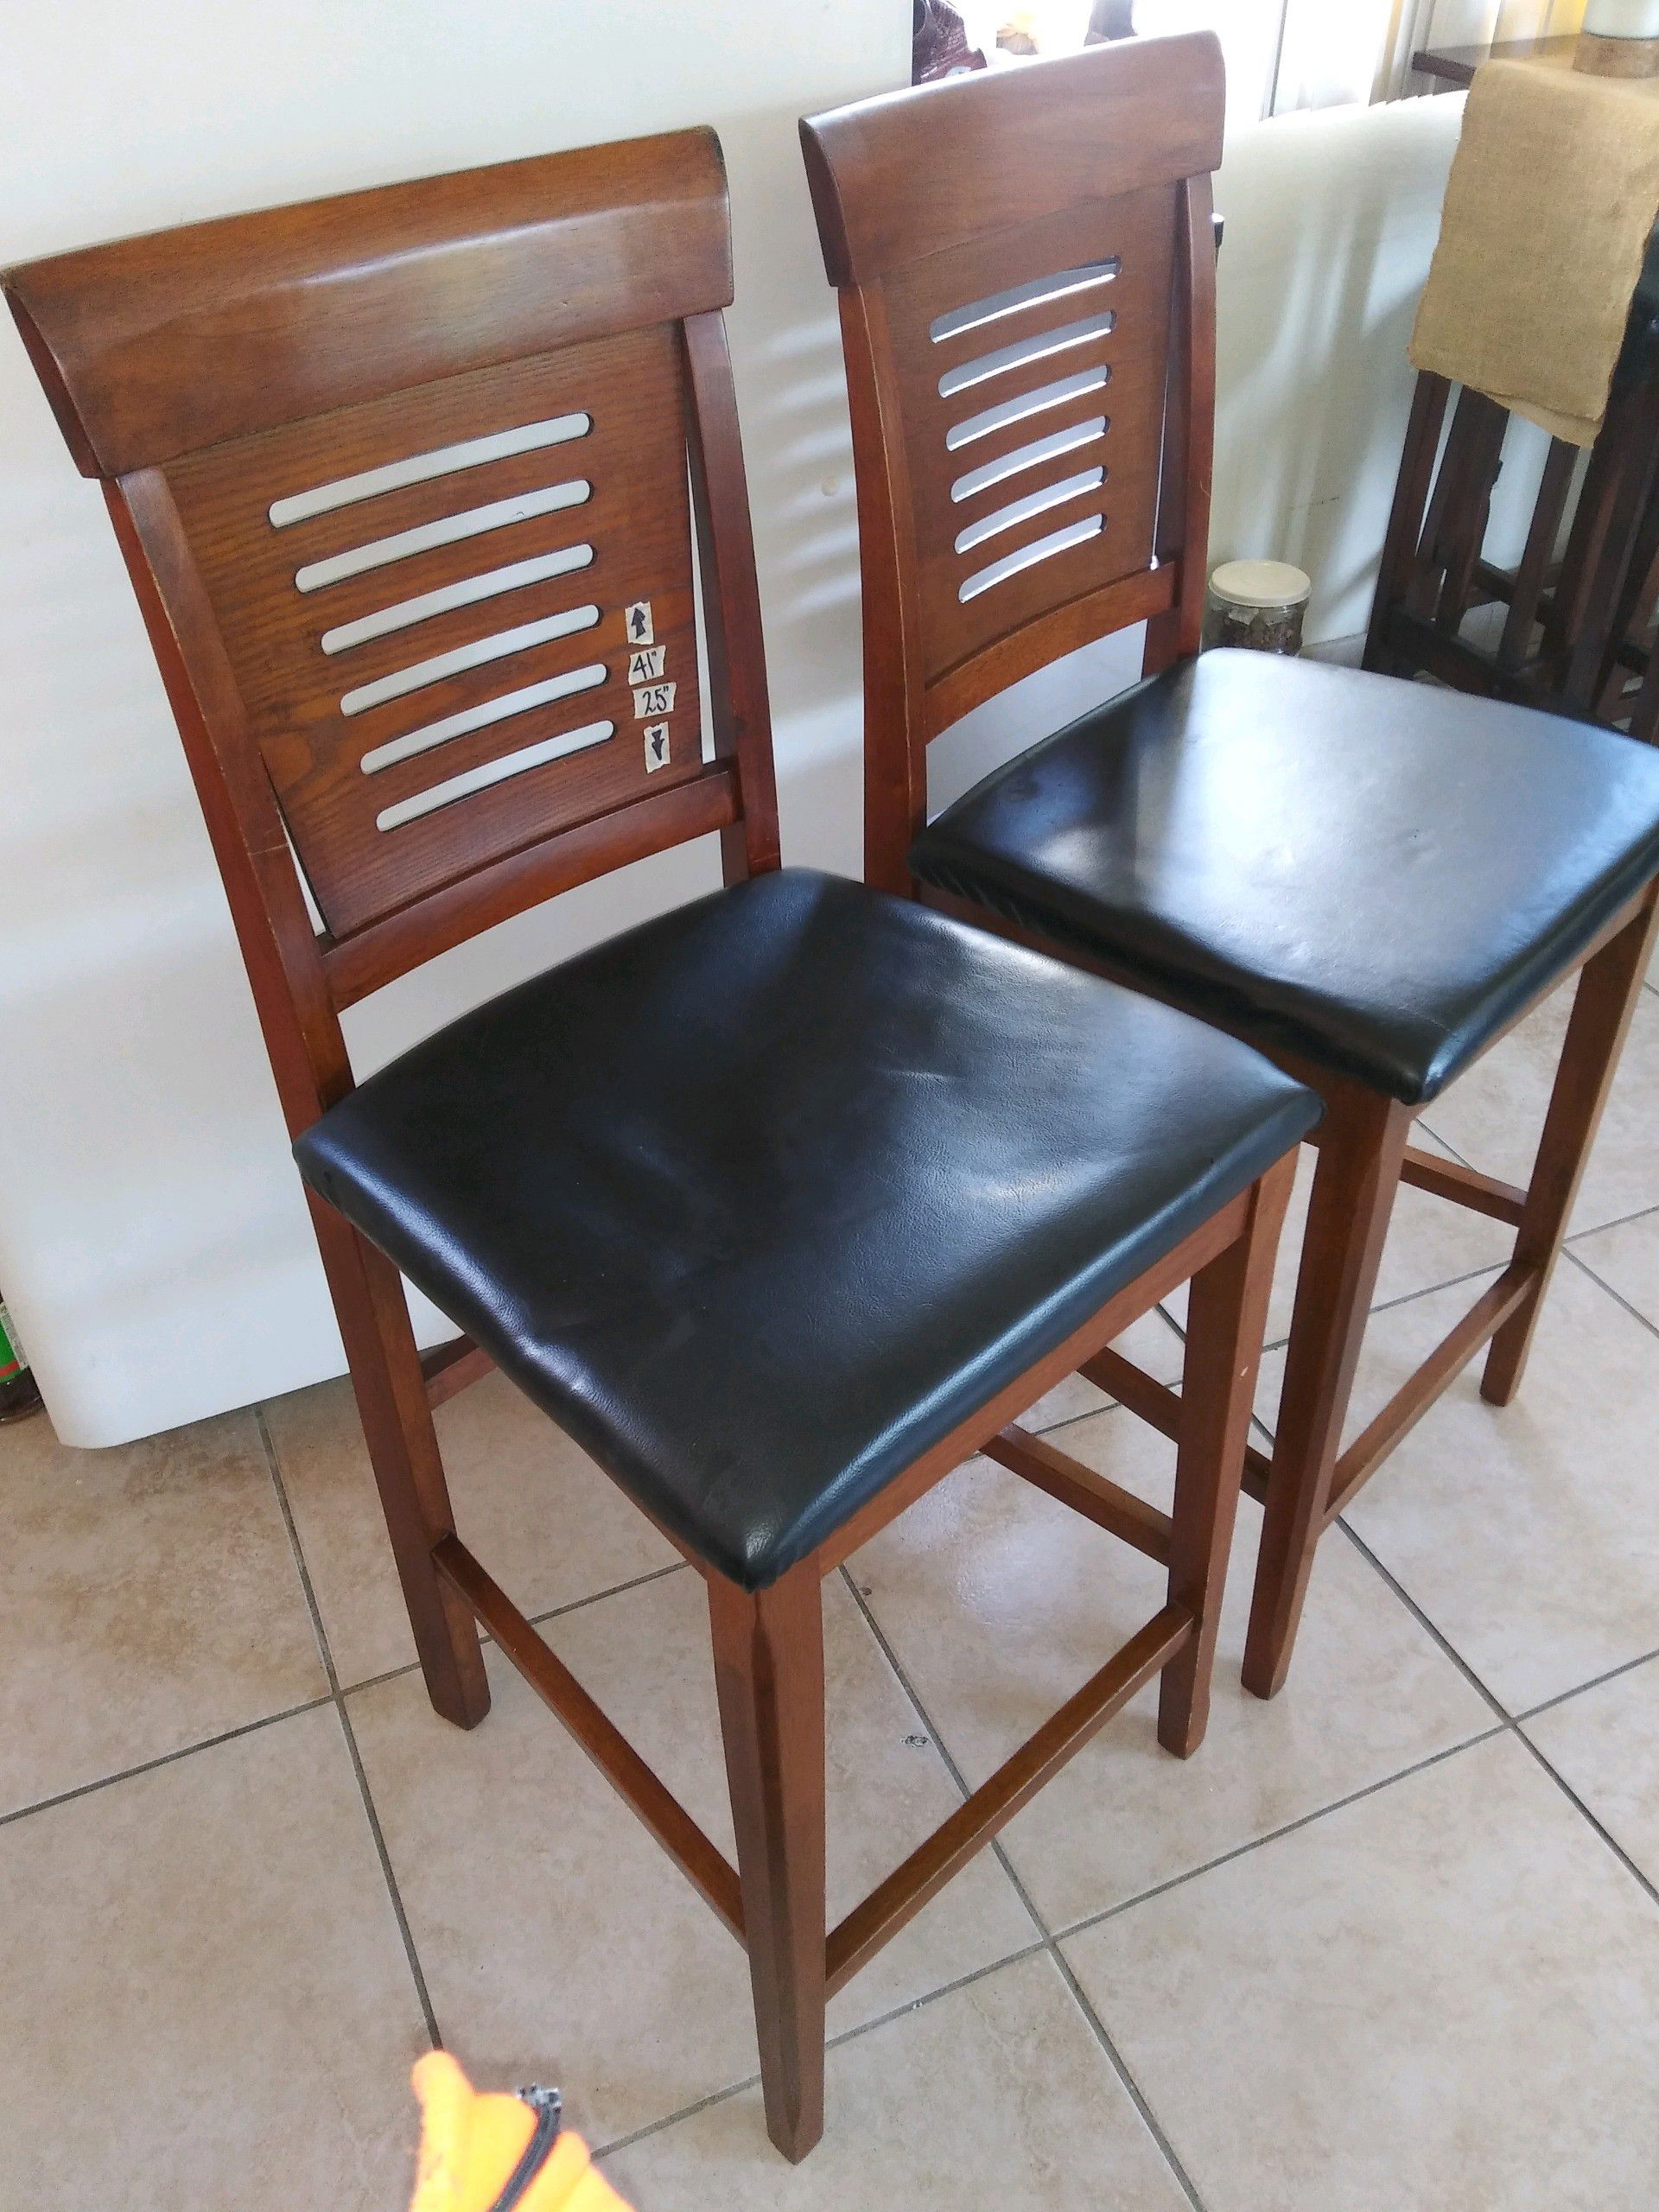 2 high bar stool in good condition